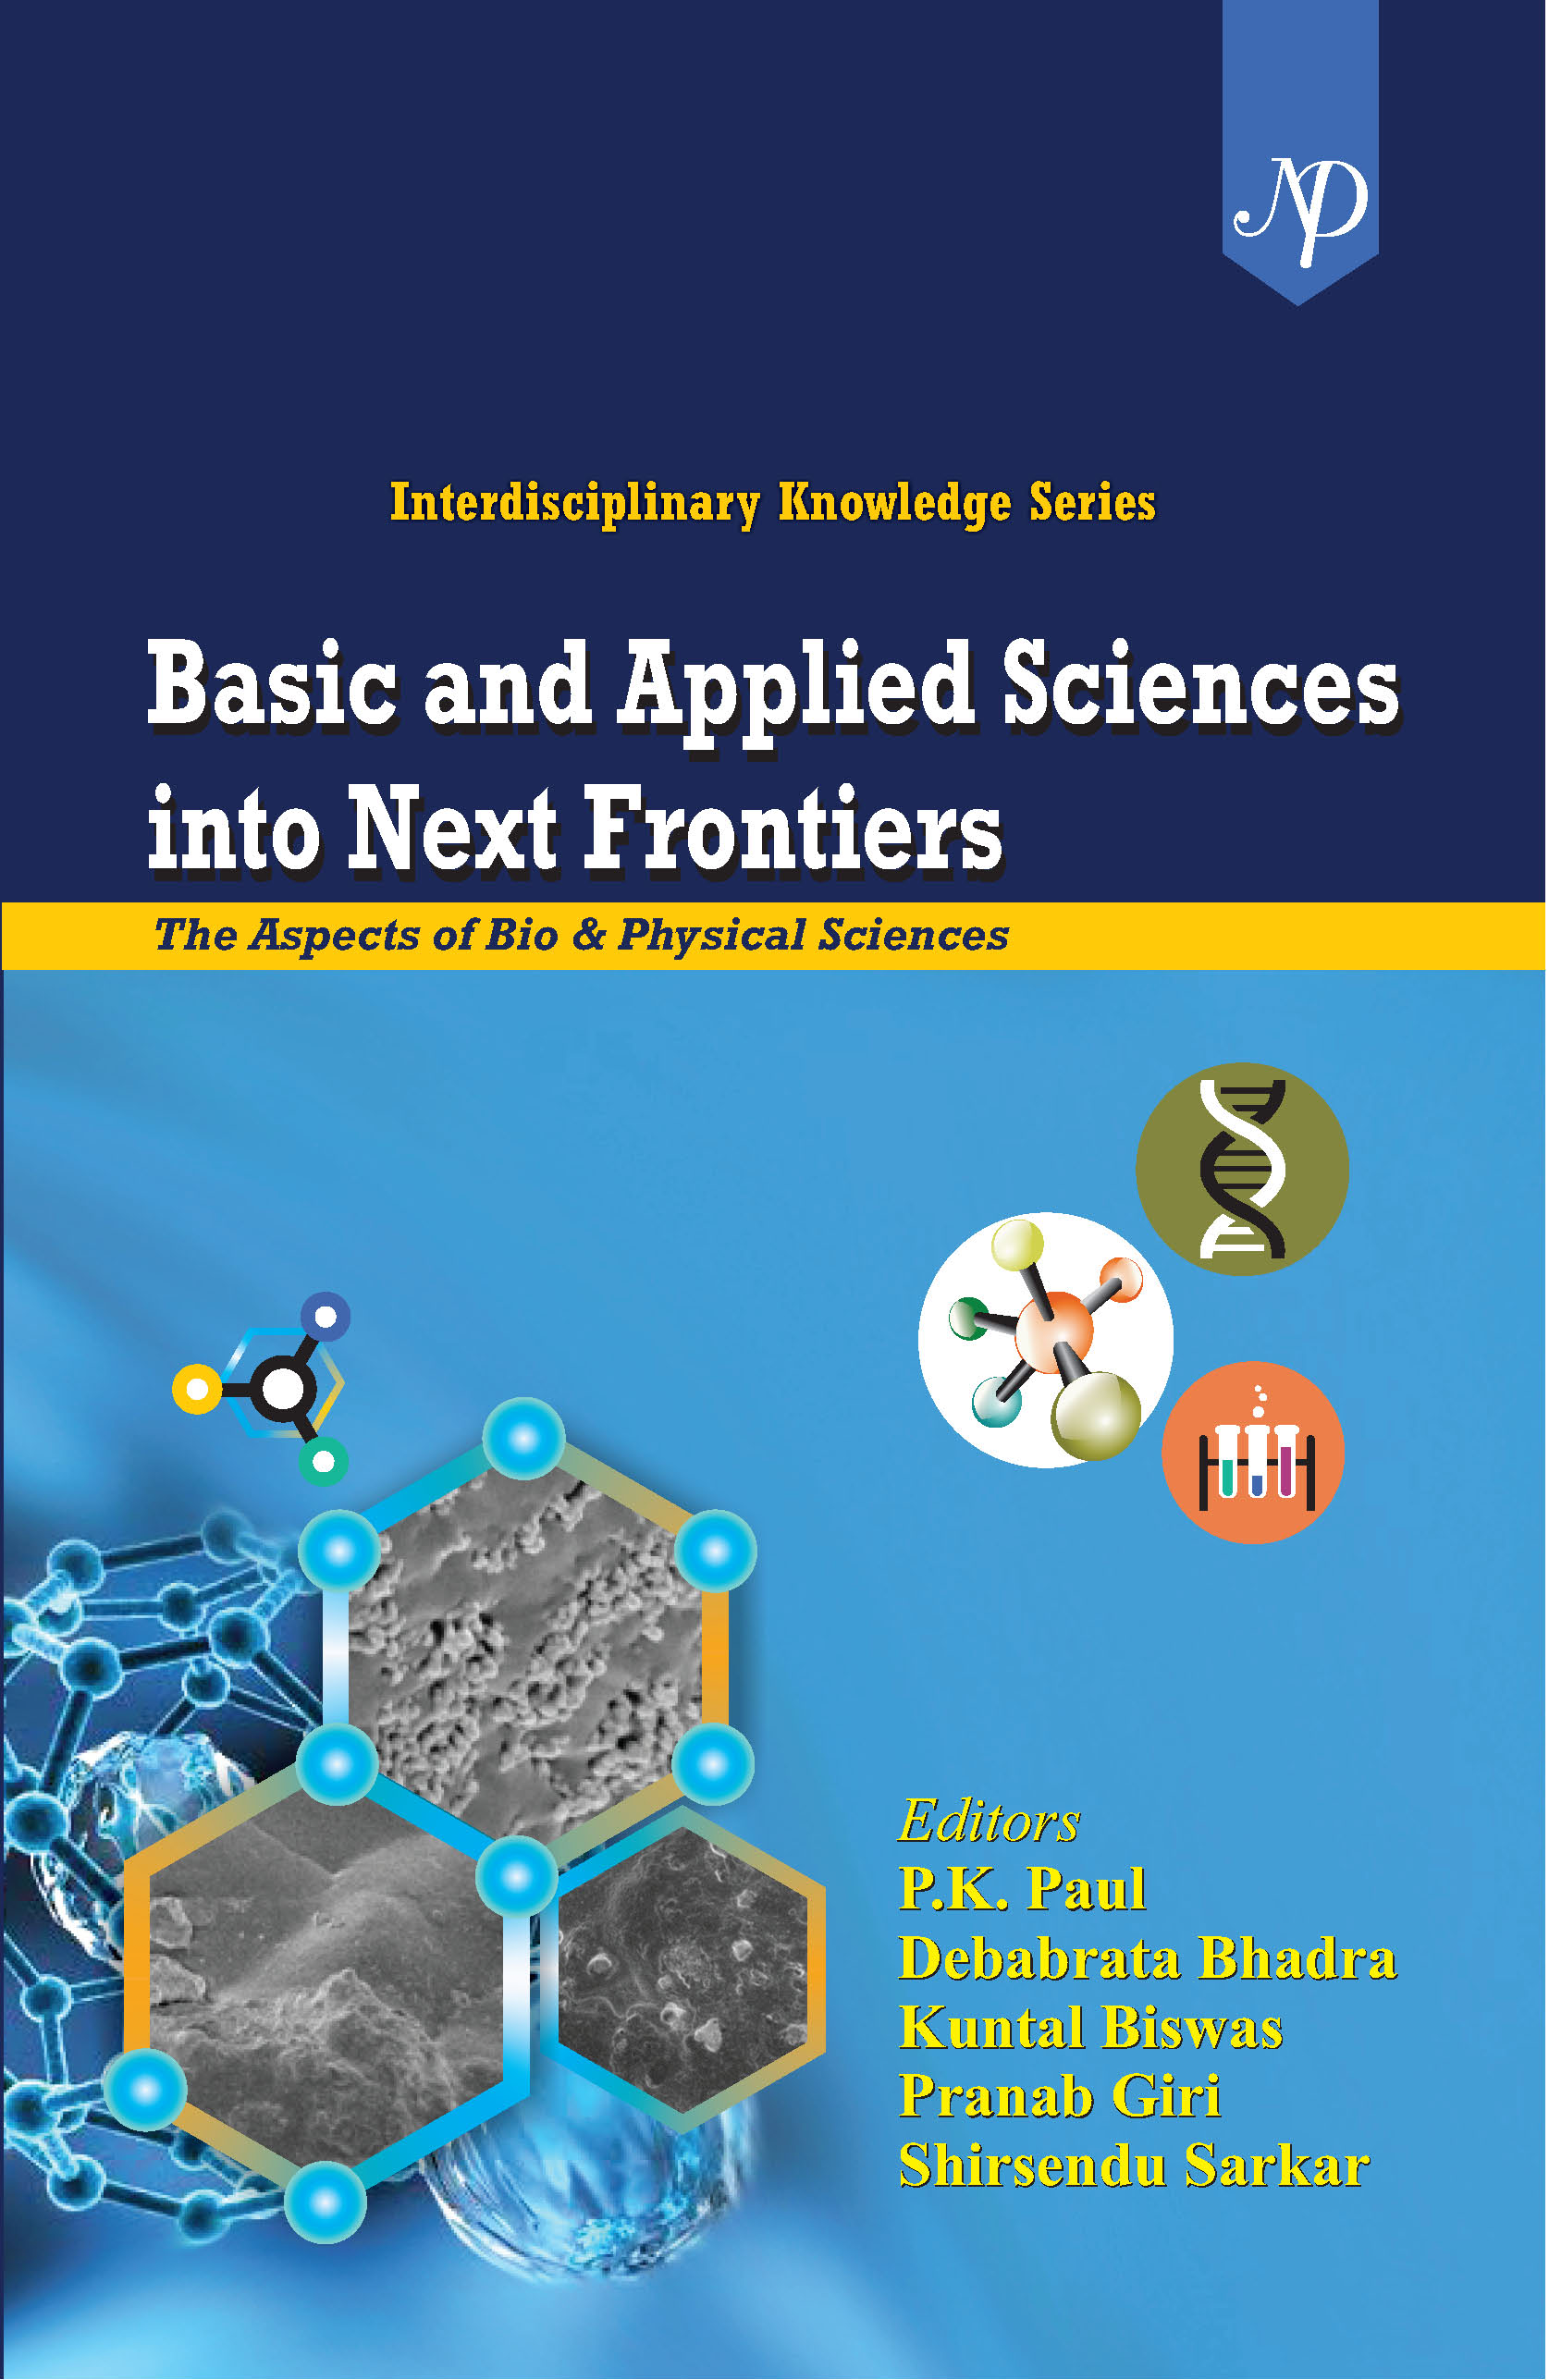 Basic and Applied Sciences into Next Frontiers by PK Paul.jpg